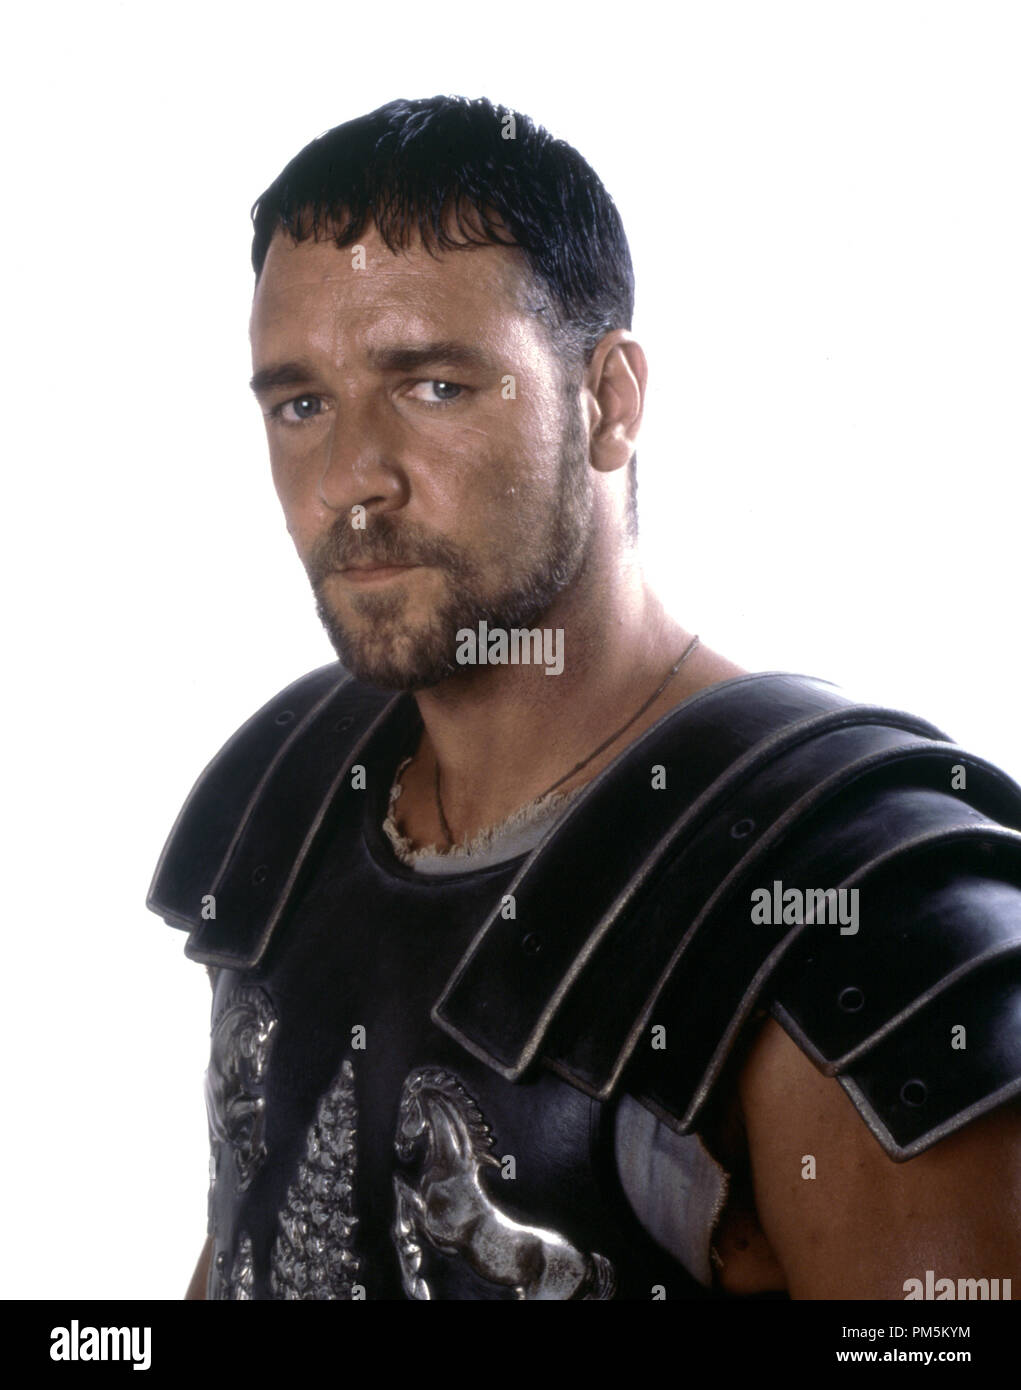 Gladiator Movie Russell Crowe High Resolution Stock Photography and ...